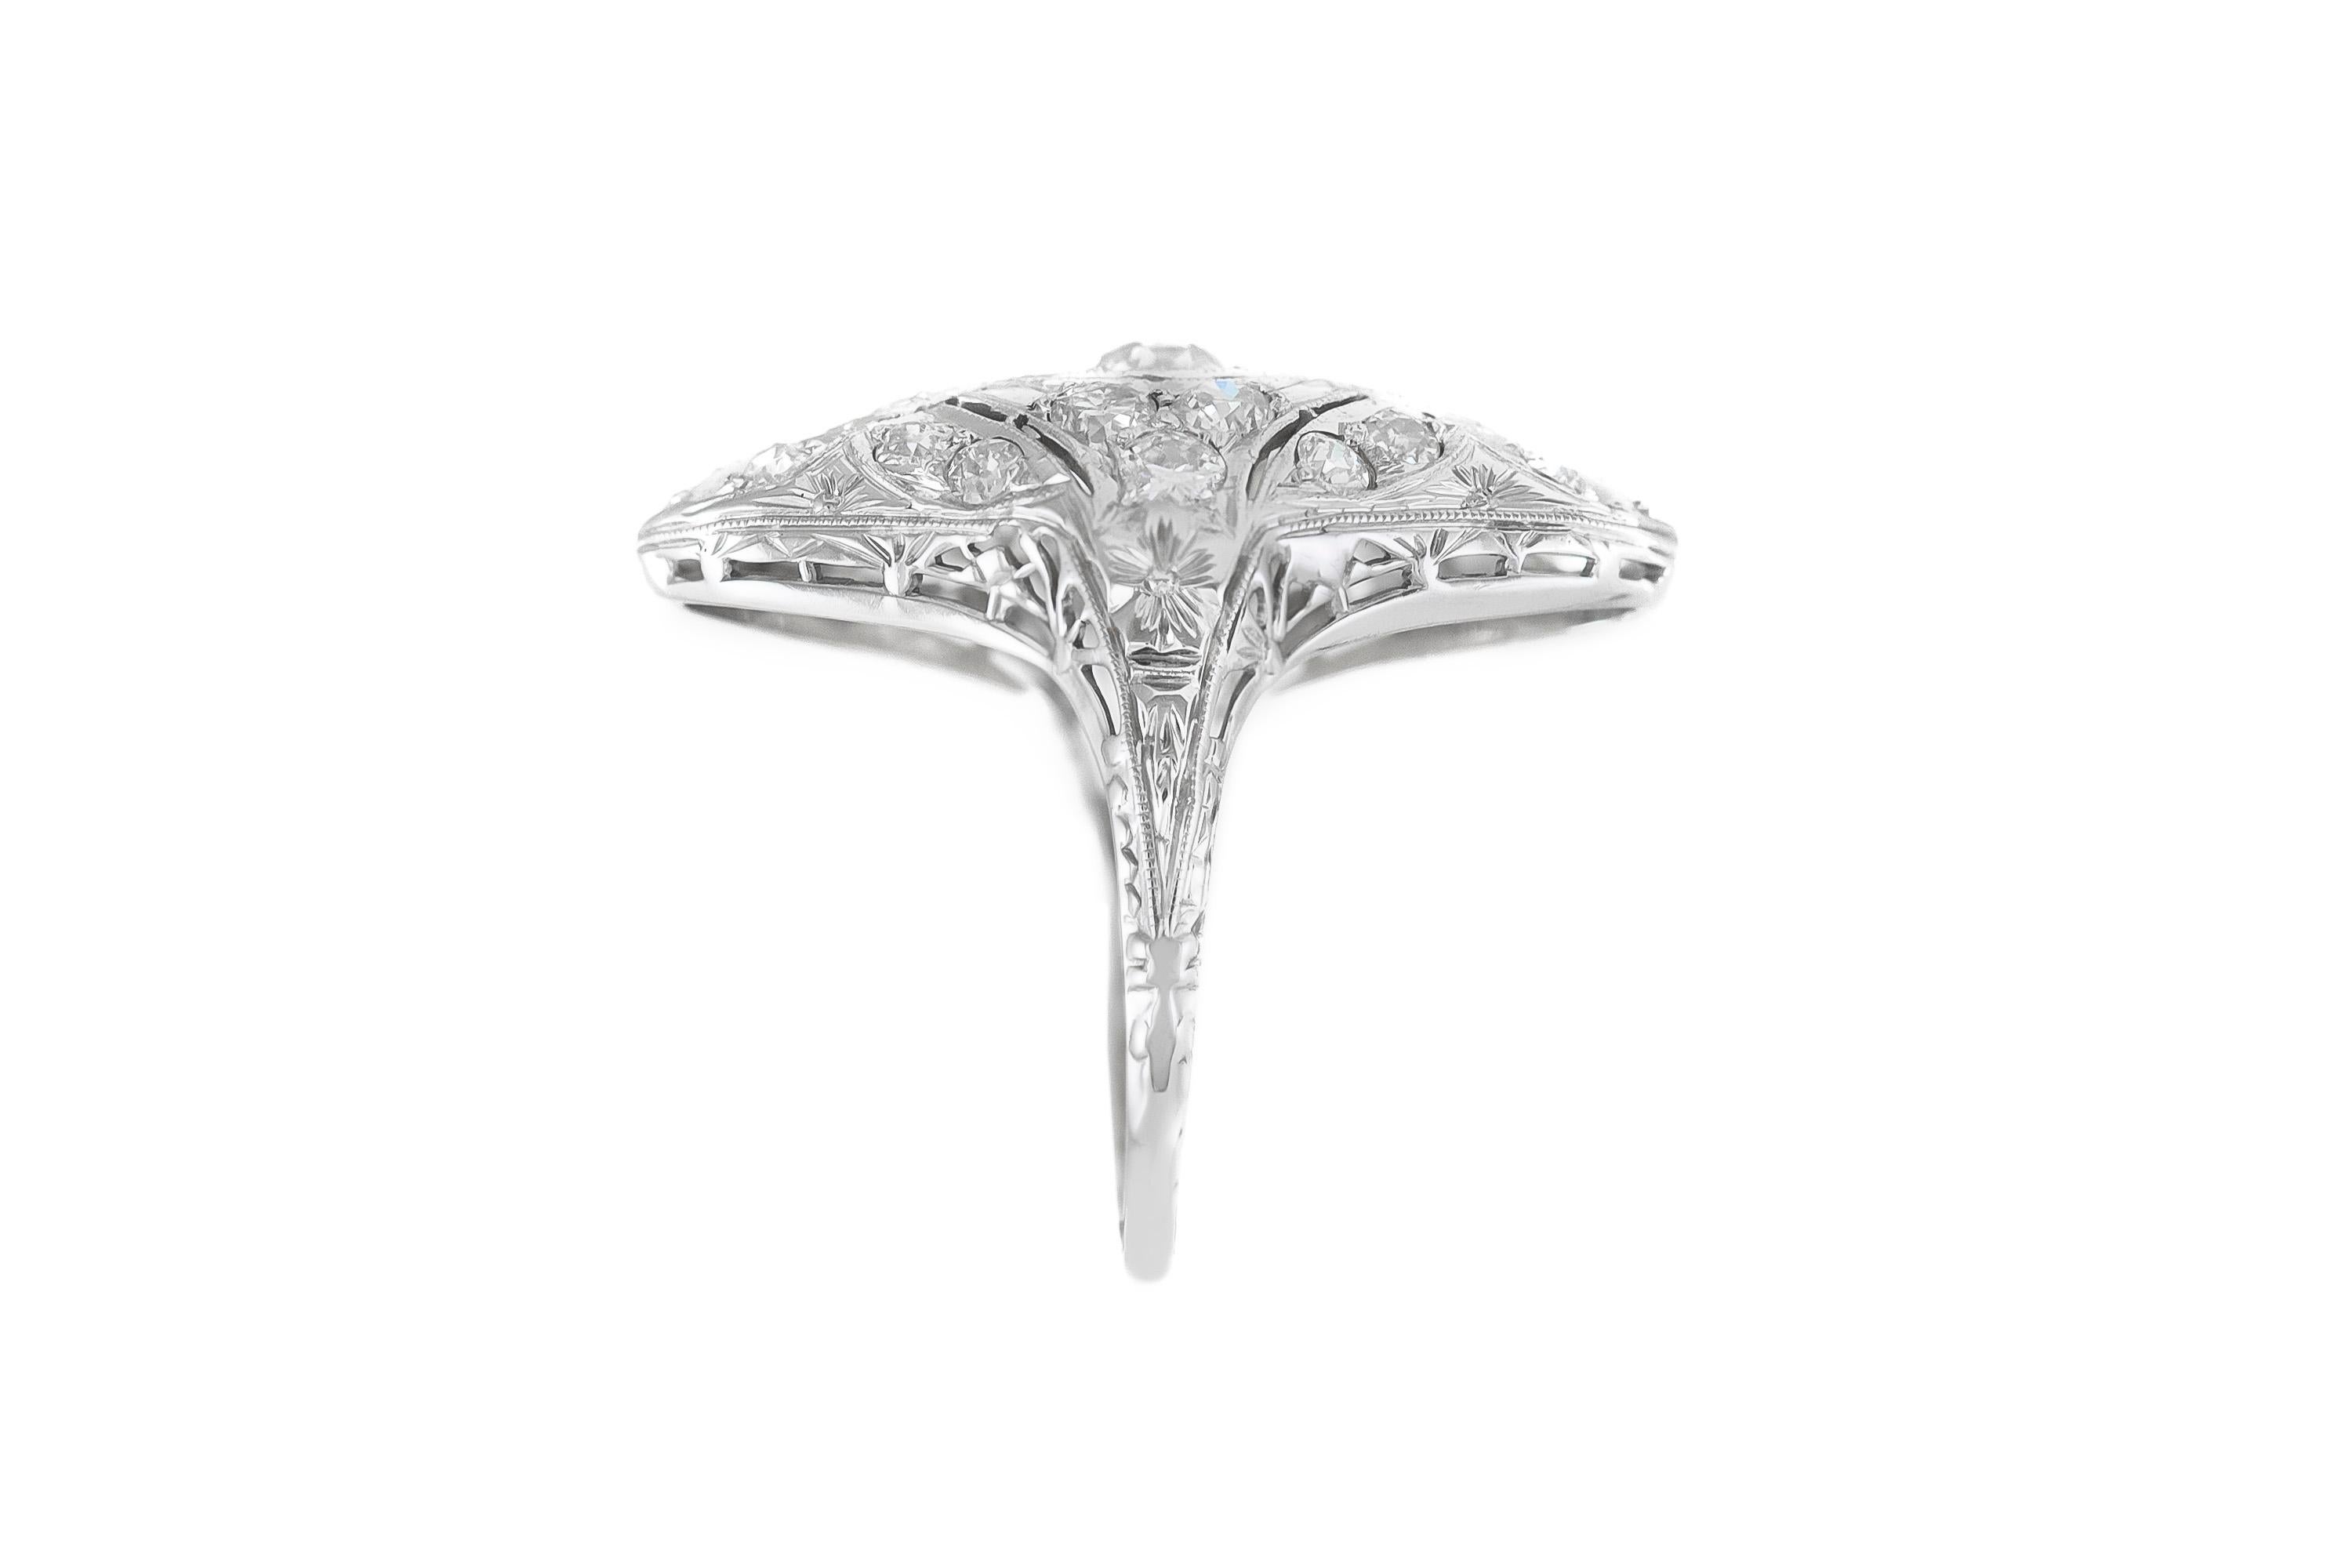 The ring is finely crafted in 18k white gold with diamonds weighing approximately total of 2.20 carat.
Size 6.00 ( easy to resize)
Circa 1930